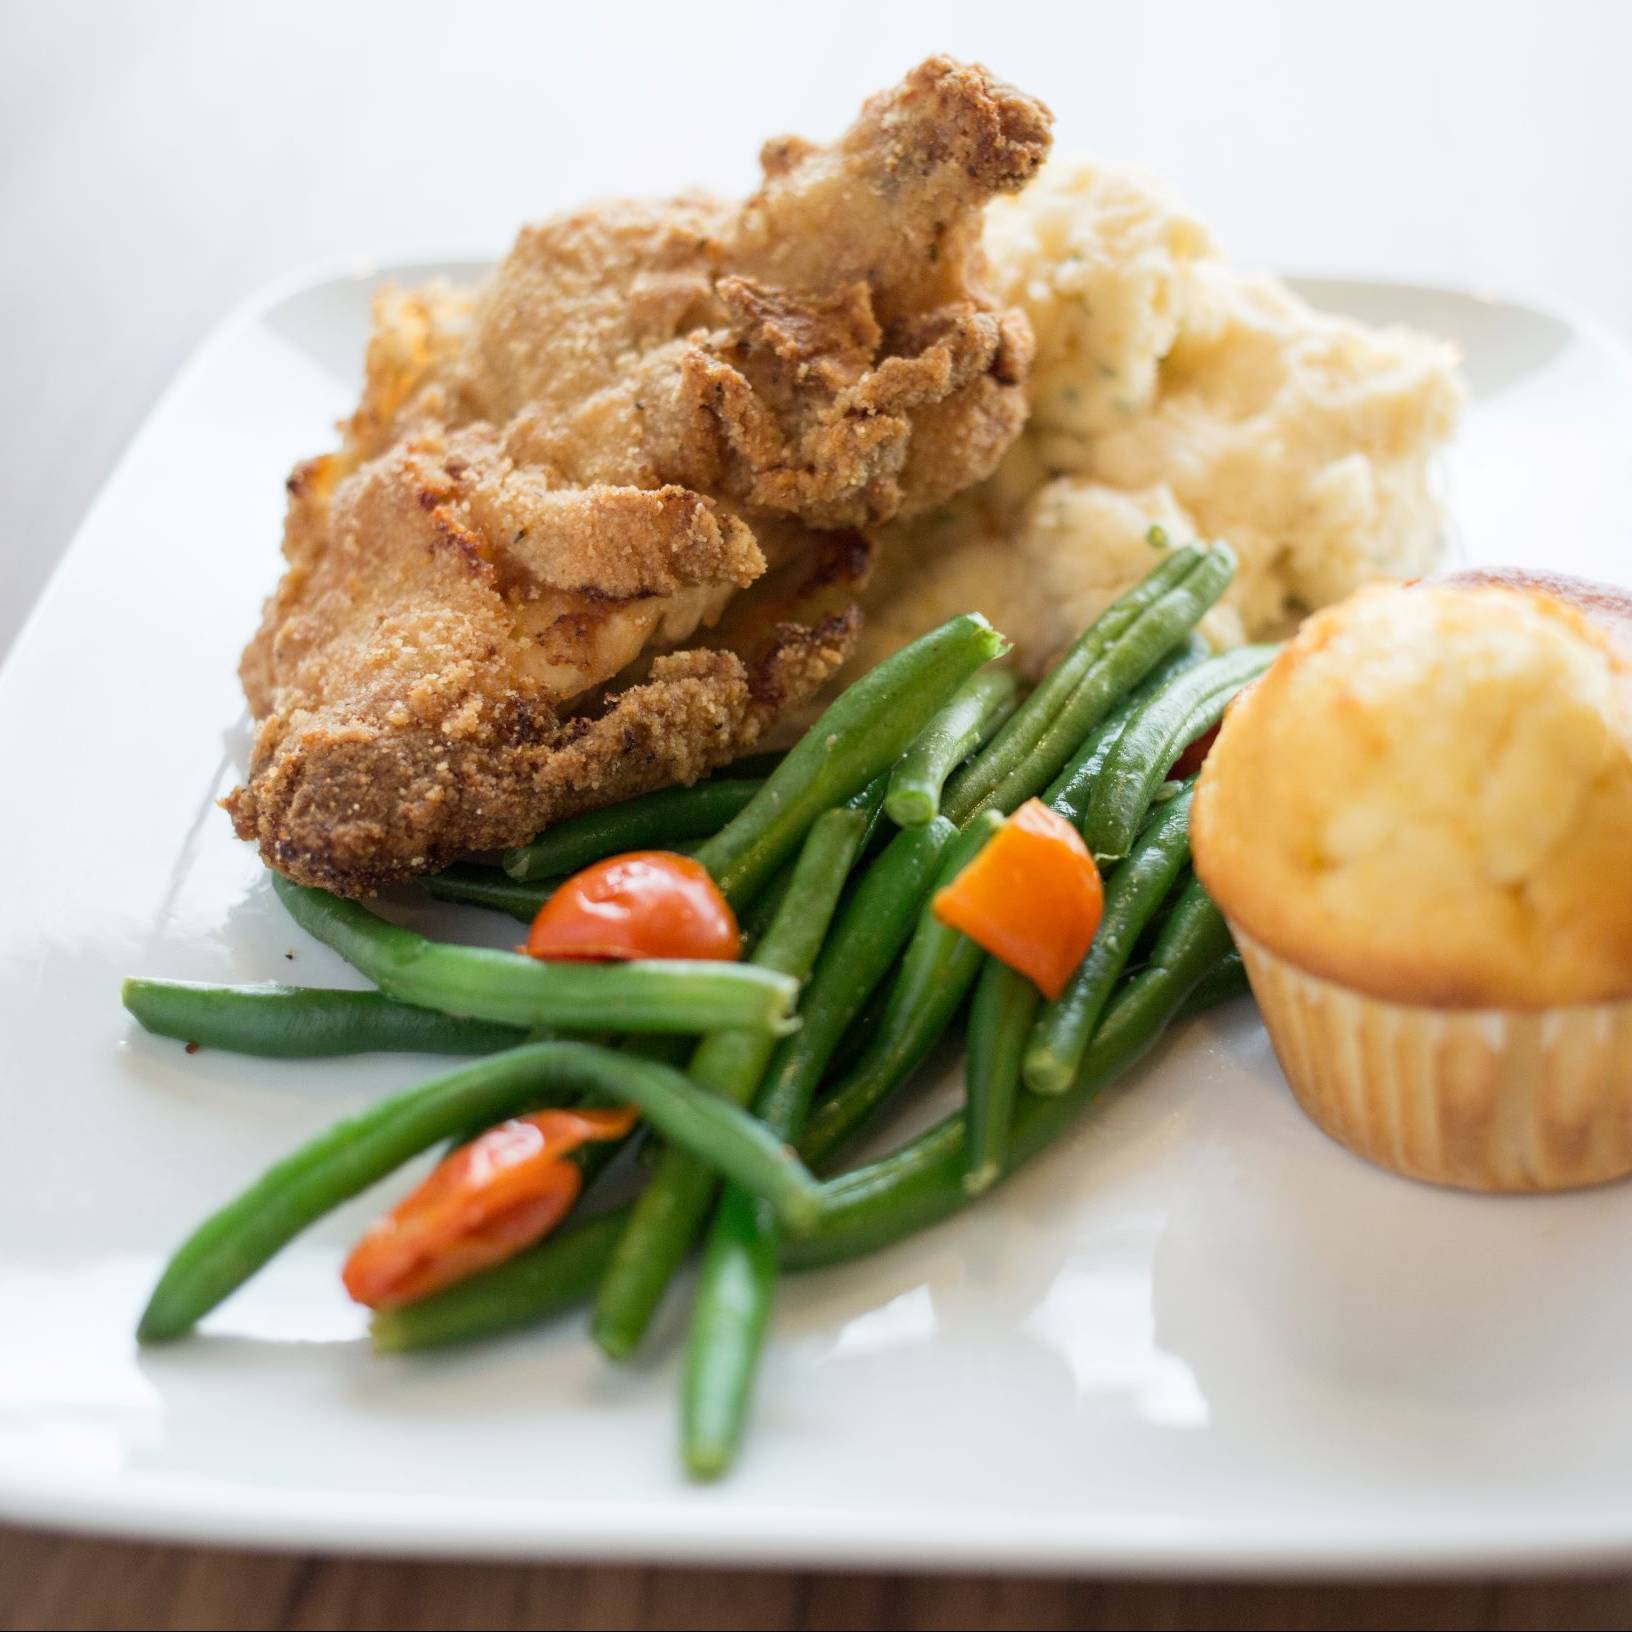 Fried chicken plate with green beans